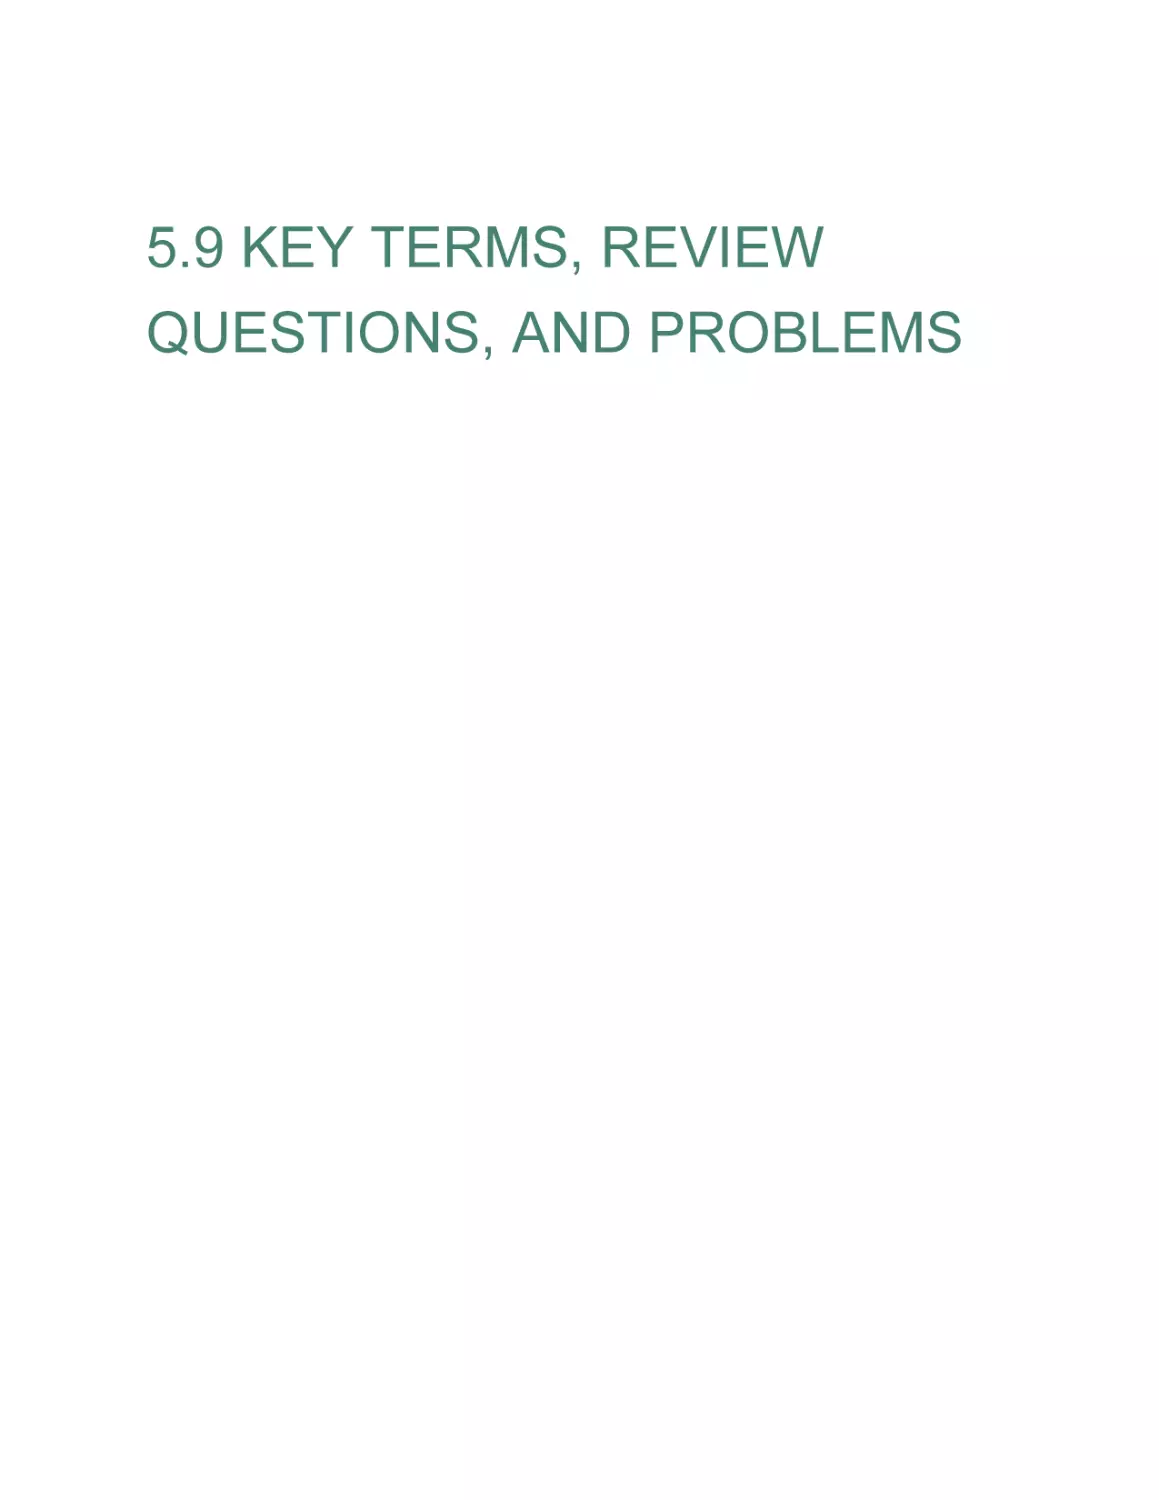 5.9 KEY TERMS, REVIEW QUESTIONS, AND PROBLEMS